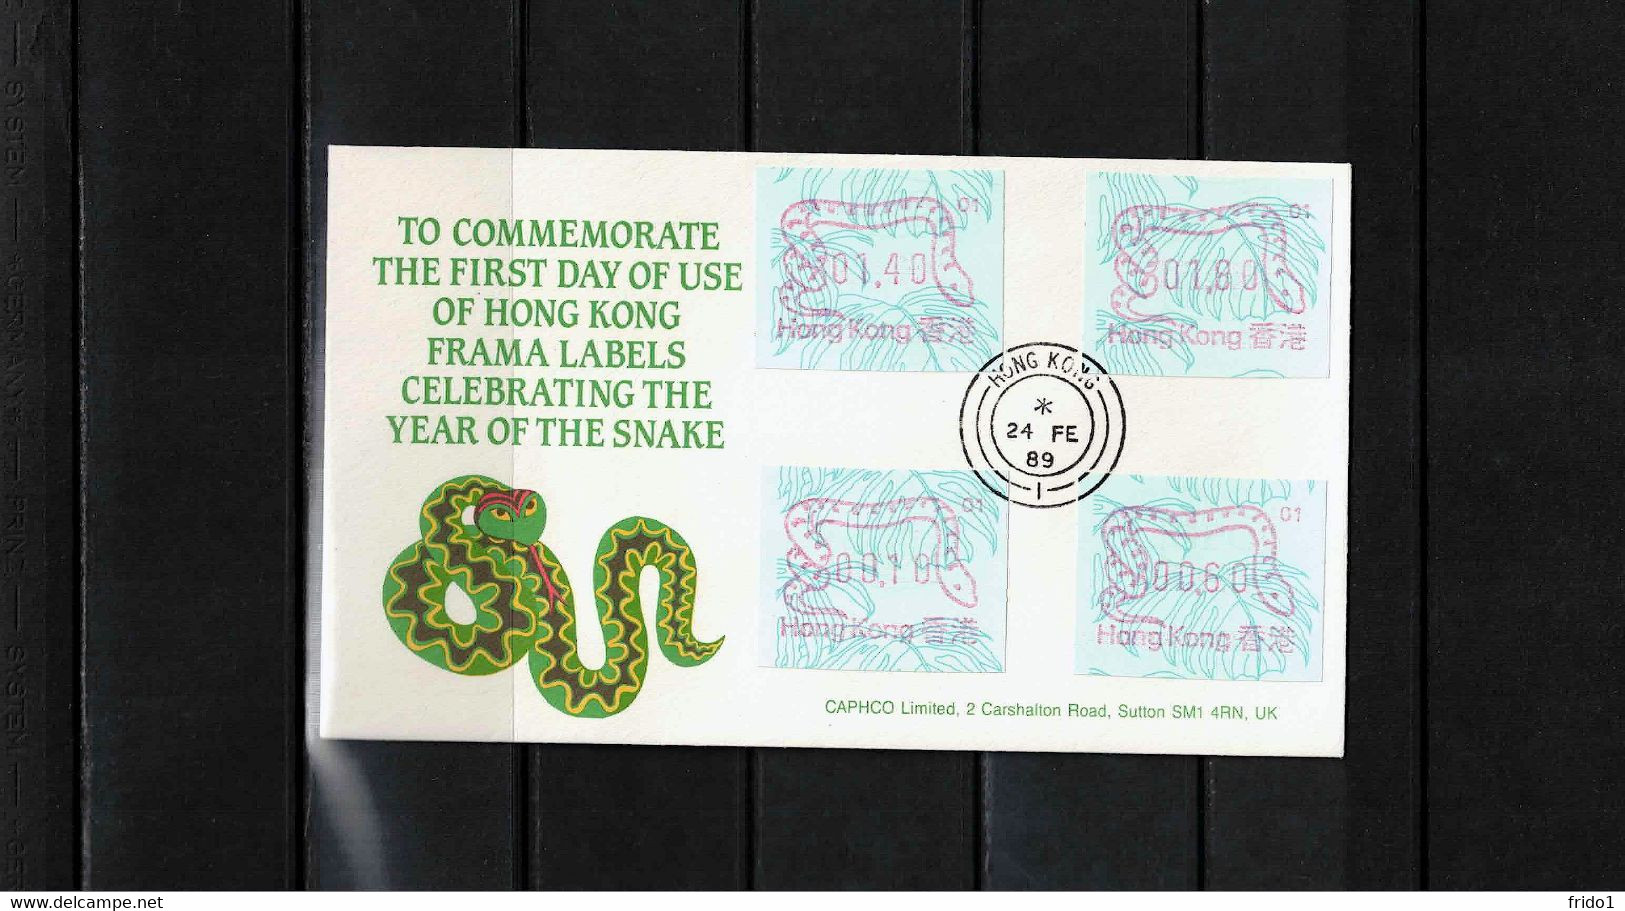 Hong Kong 1989 ATM Frama Labels NR.01 - Year Of The Snake FDC - FDC